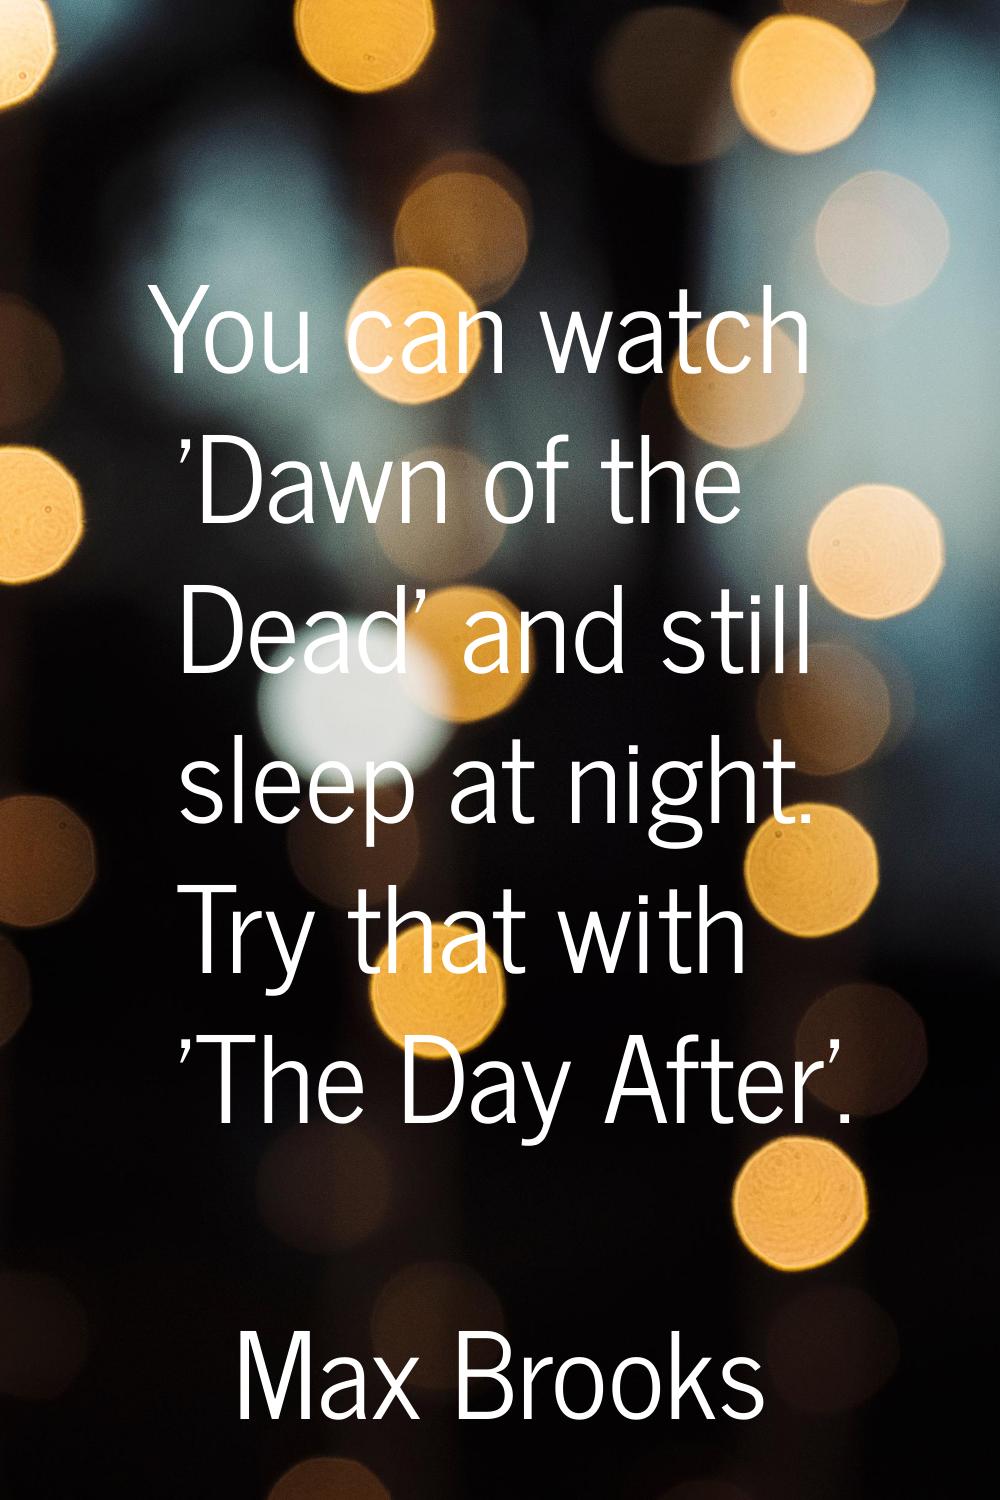 You can watch 'Dawn of the Dead' and still sleep at night. Try that with 'The Day After'.